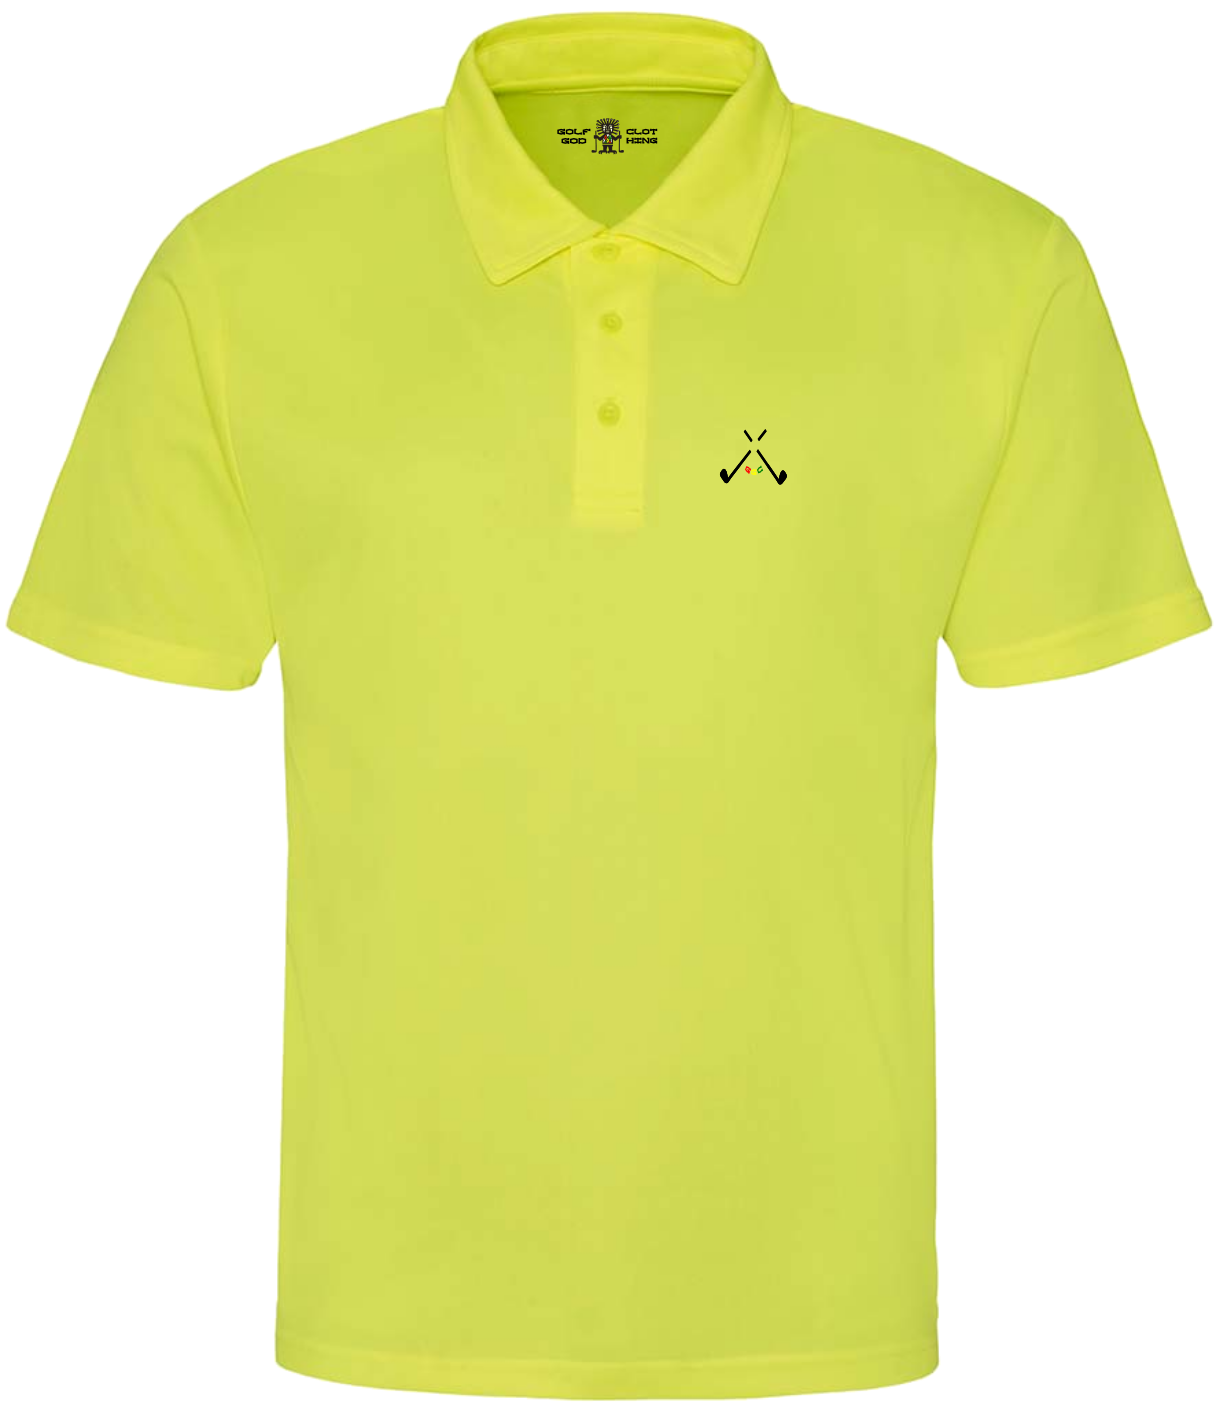 golf god clothing crossed clubs electric yellow  neoteric polo shirt